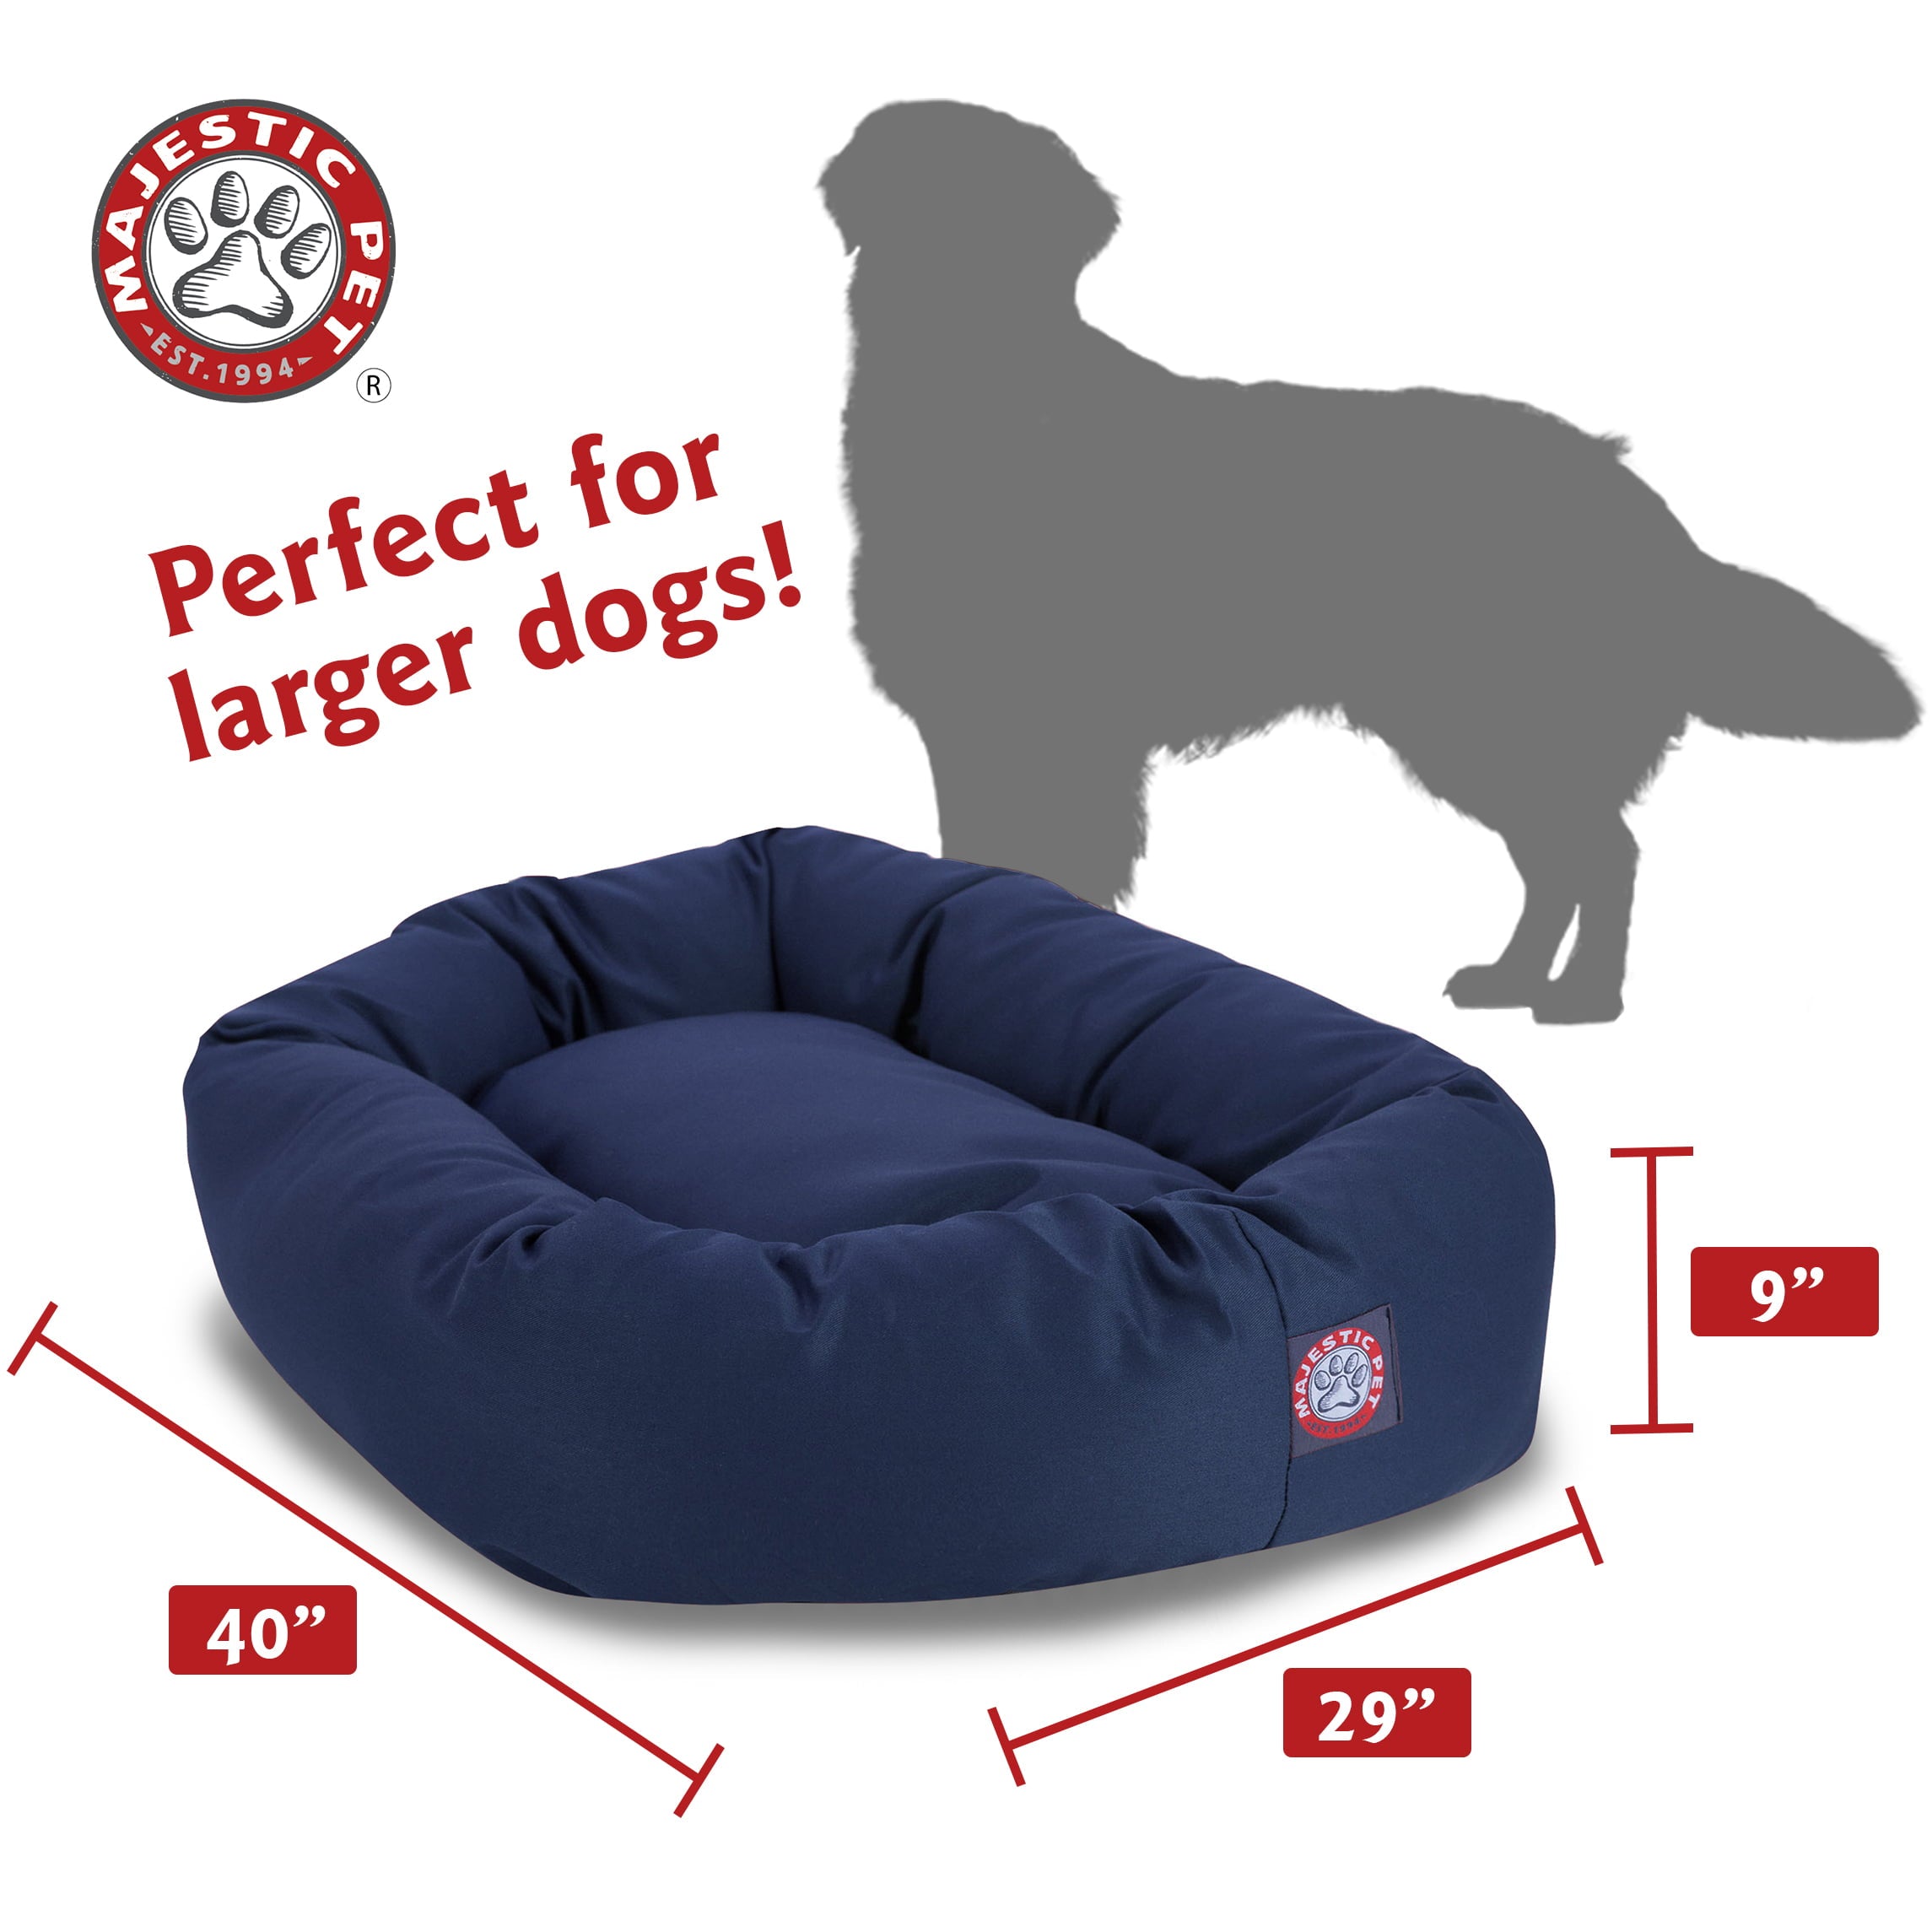 Majestic Pet | Poly/Cotton Bagel Pet Bed For Dogs， Blue， Large